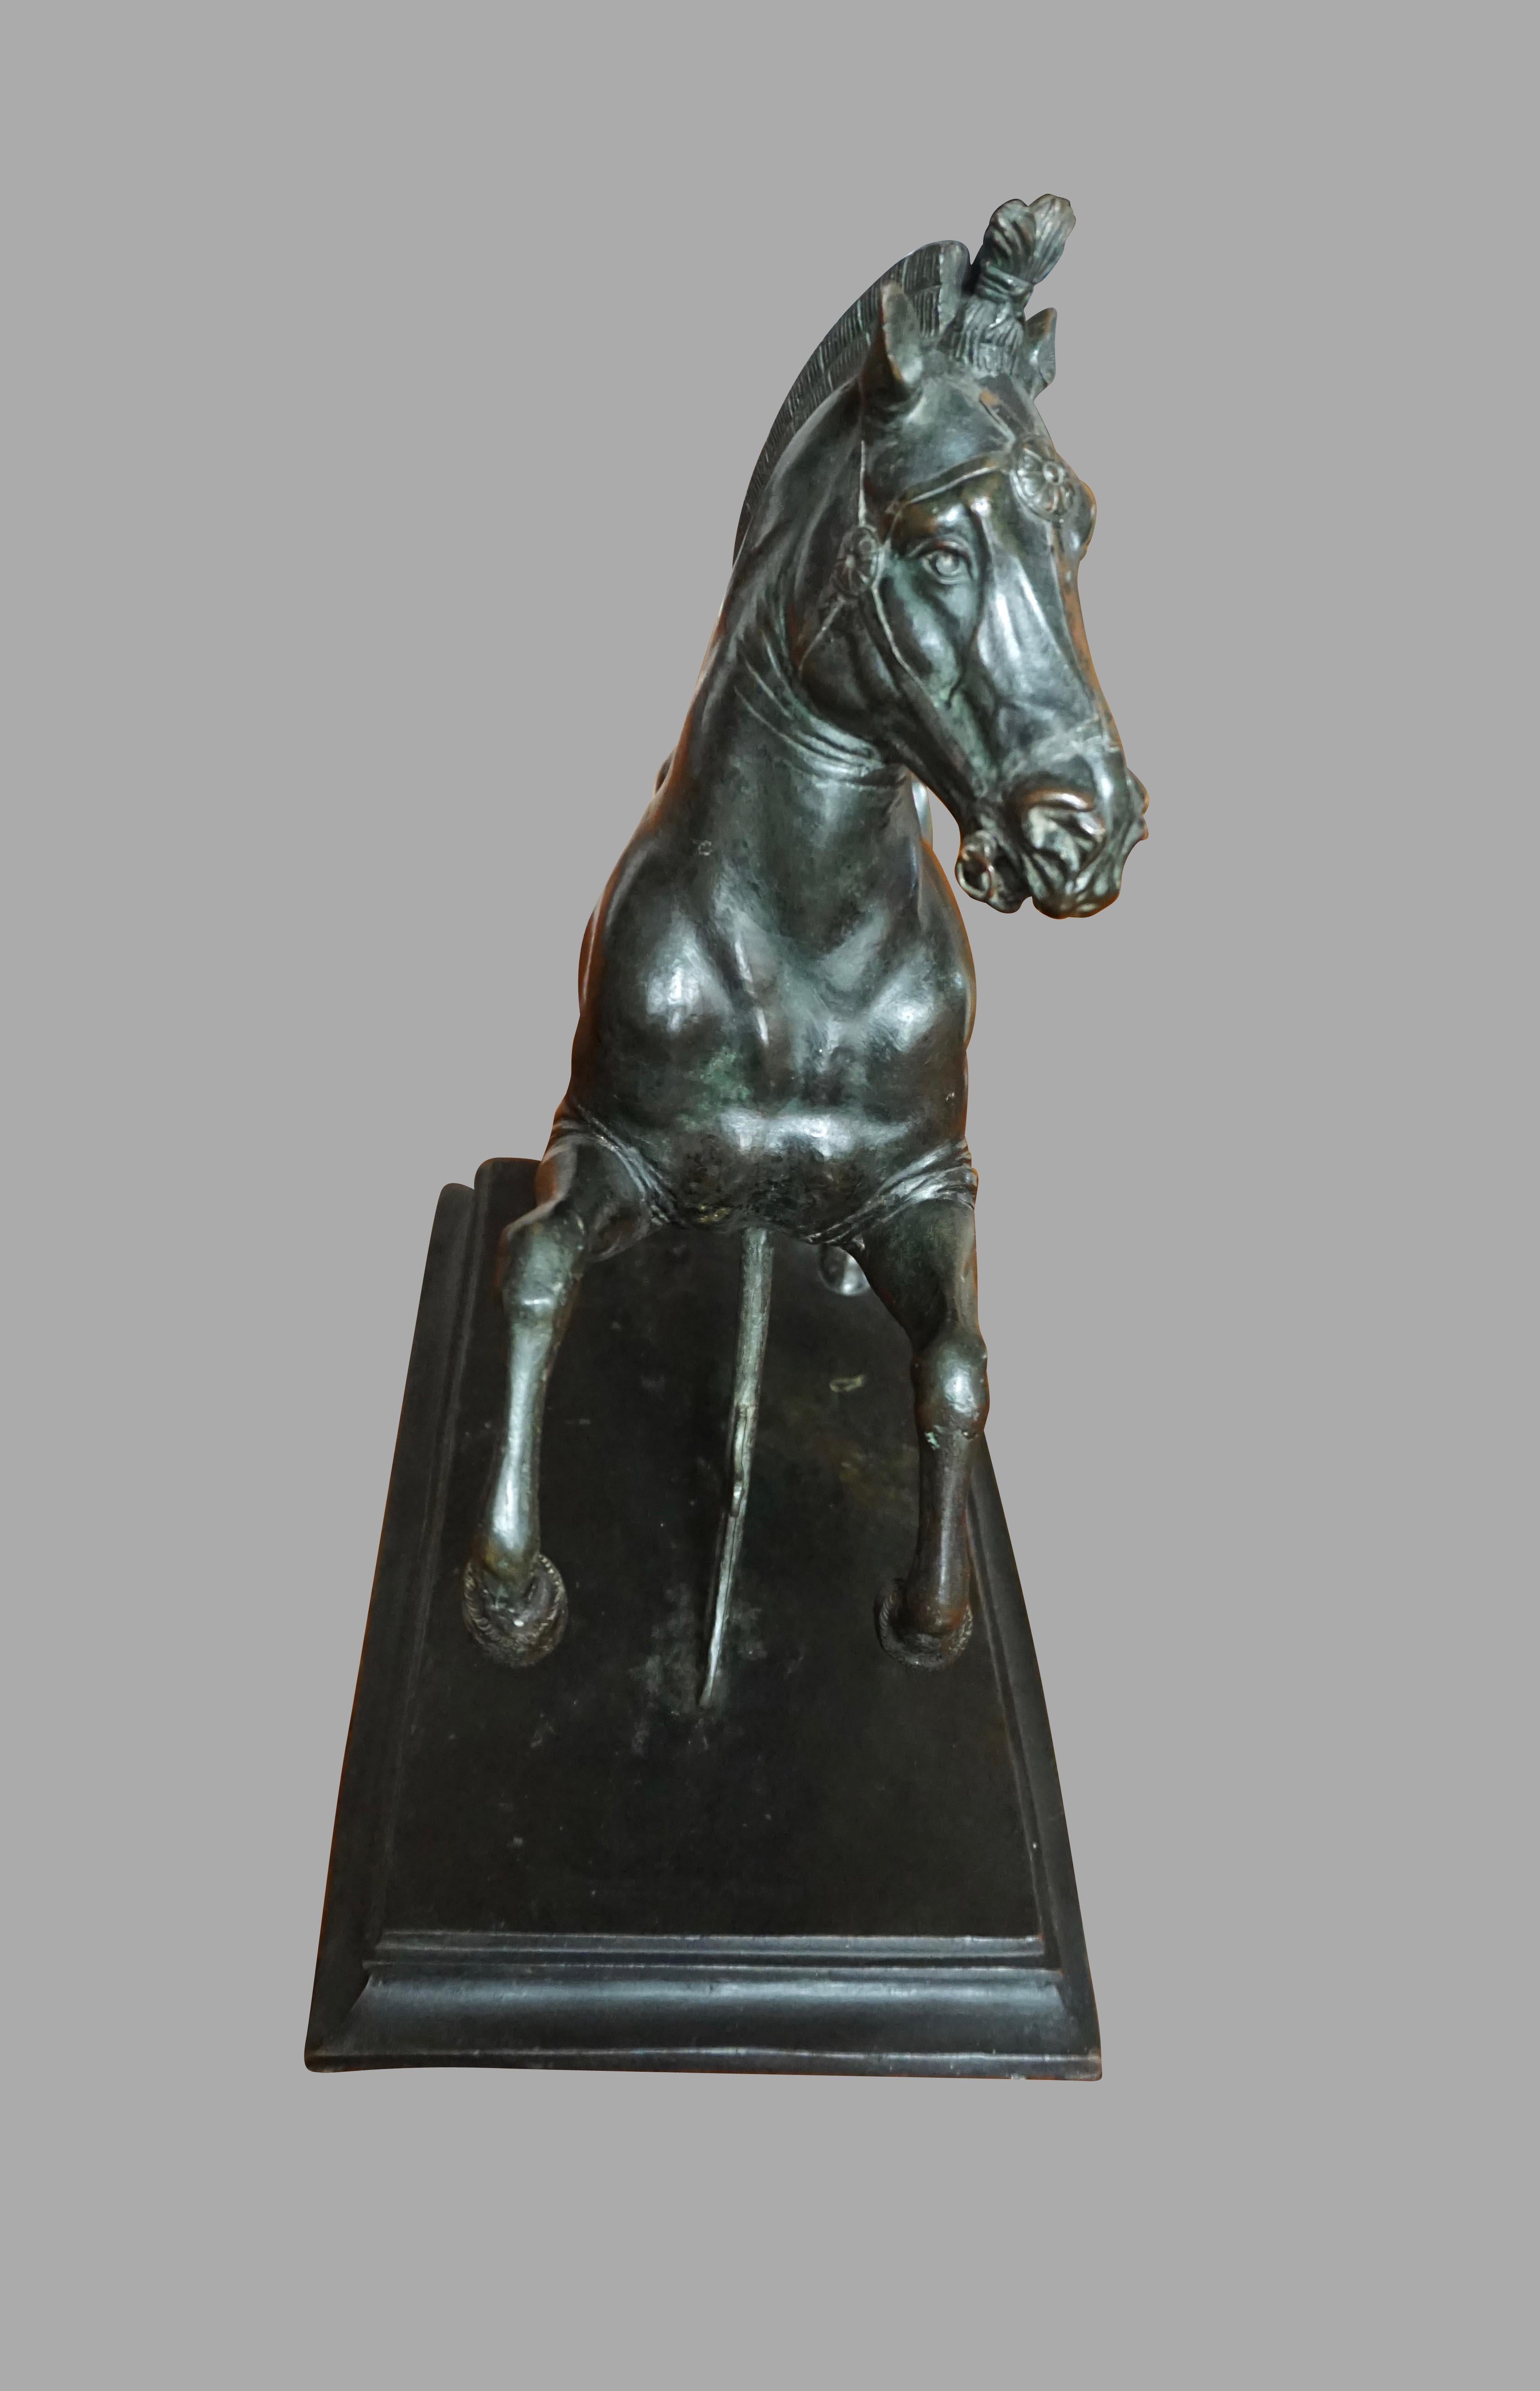 A finely cast continental patinated bronze figure of a galloping horse in the Renaissance manner, now on a contemporary painted faux marble wooden plinth, circa 1850.